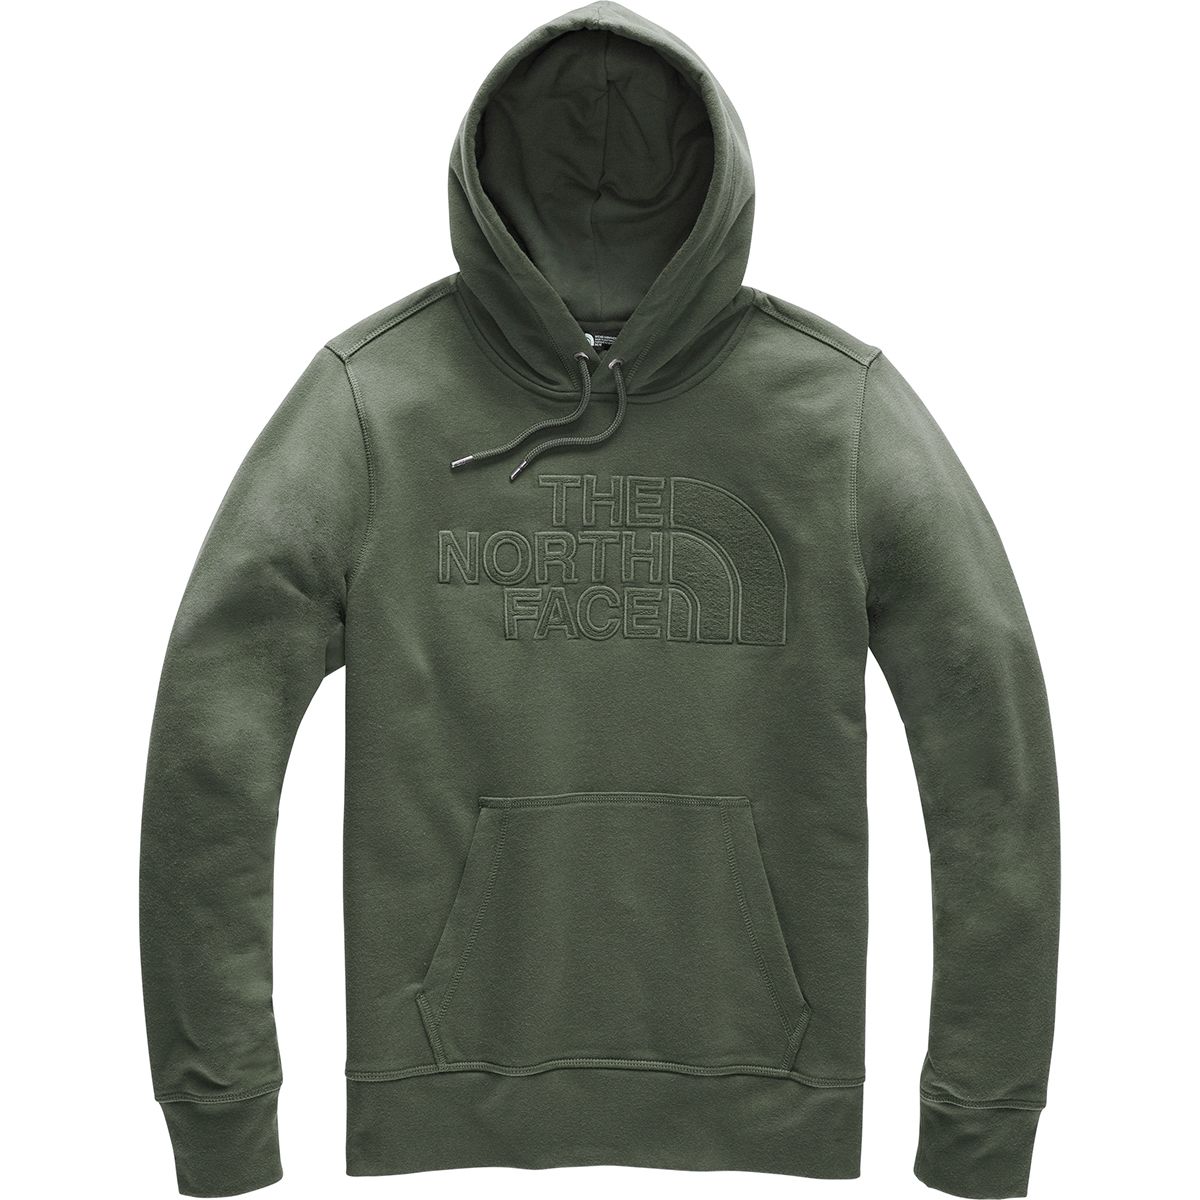 The North Face Sobranta Pullover Hoodie - Men's | Backcountry.com